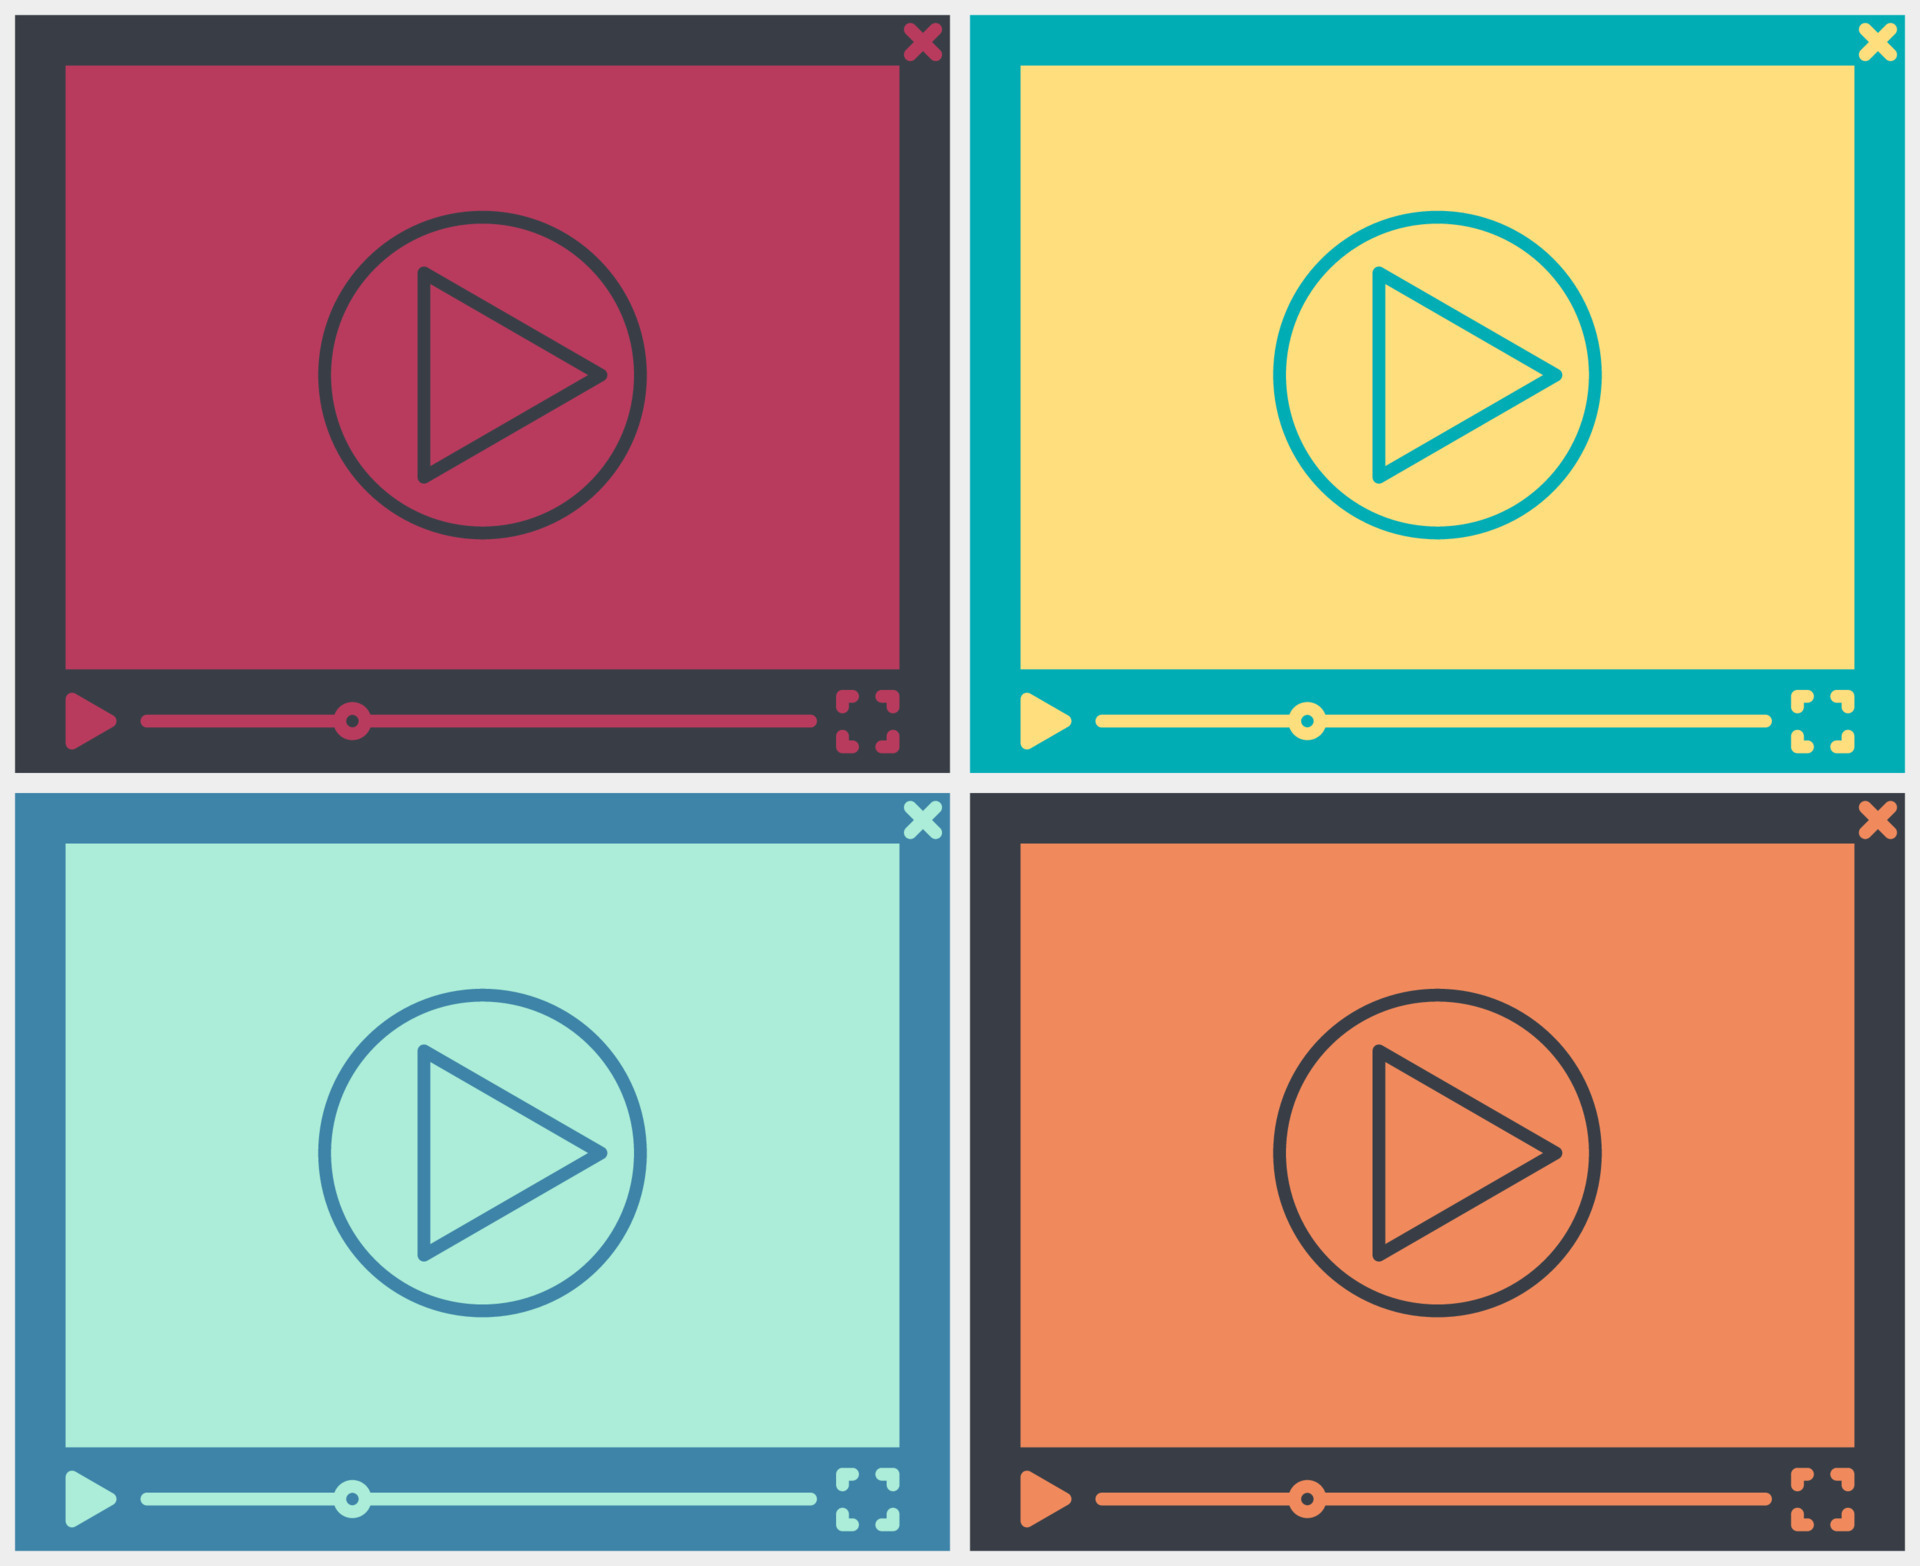 video-player-template-flat-style-in-different-colors-7756055-vector